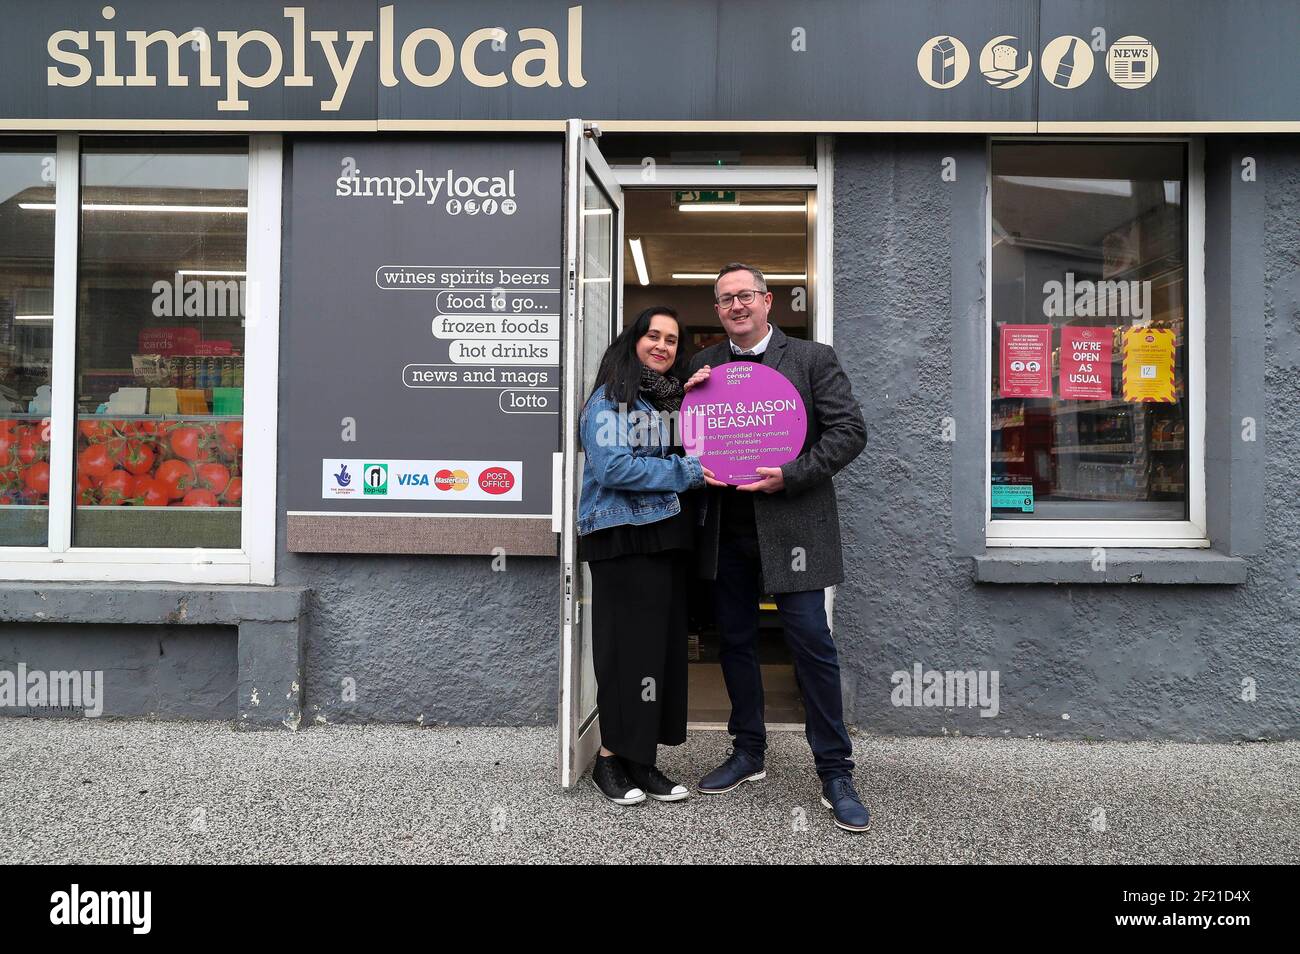 EDITORIAL USE ONLY Mirta and Jason Beasant receive a Census Community Hero purple plaque from the Office for National Statistics for dedication to their community in Laleston, Wales ahead of Census 2021, which is on March 21. Stock Photo